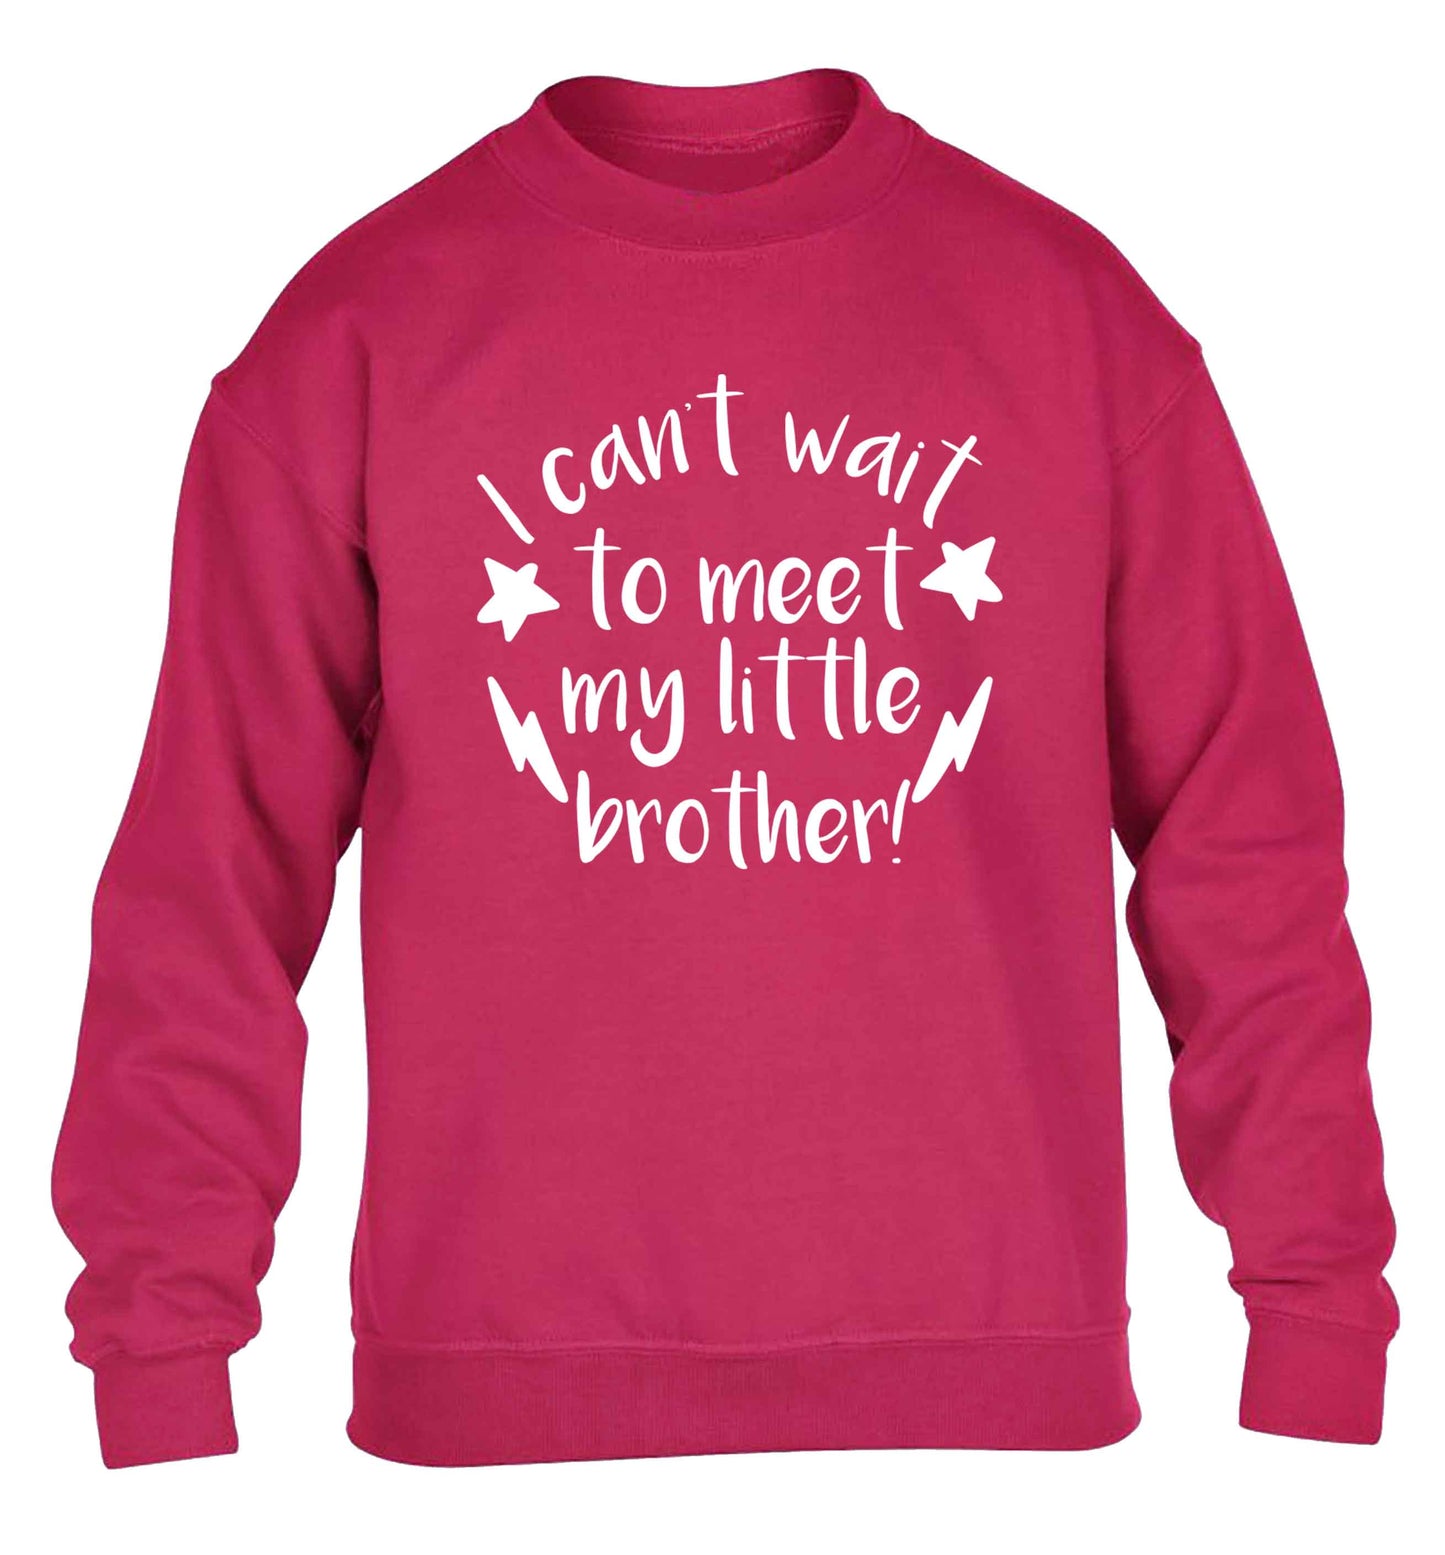 I can't wait to meet my sister! children's pink sweater 12-13 Years